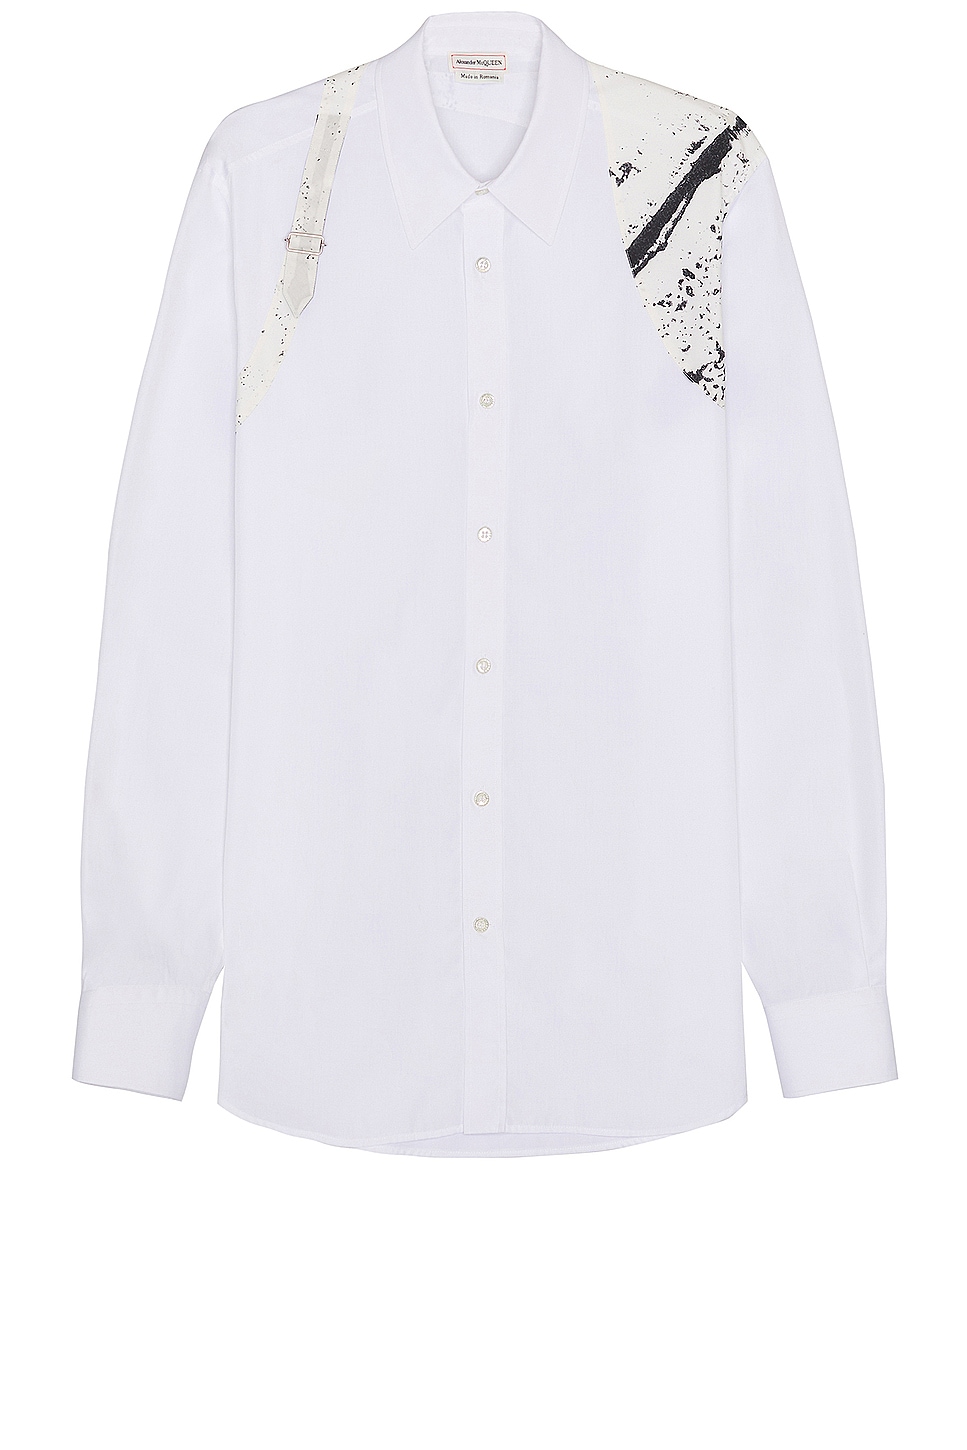 Image 1 of Alexander McQueen Half Charm Harness Shirt in Optical White